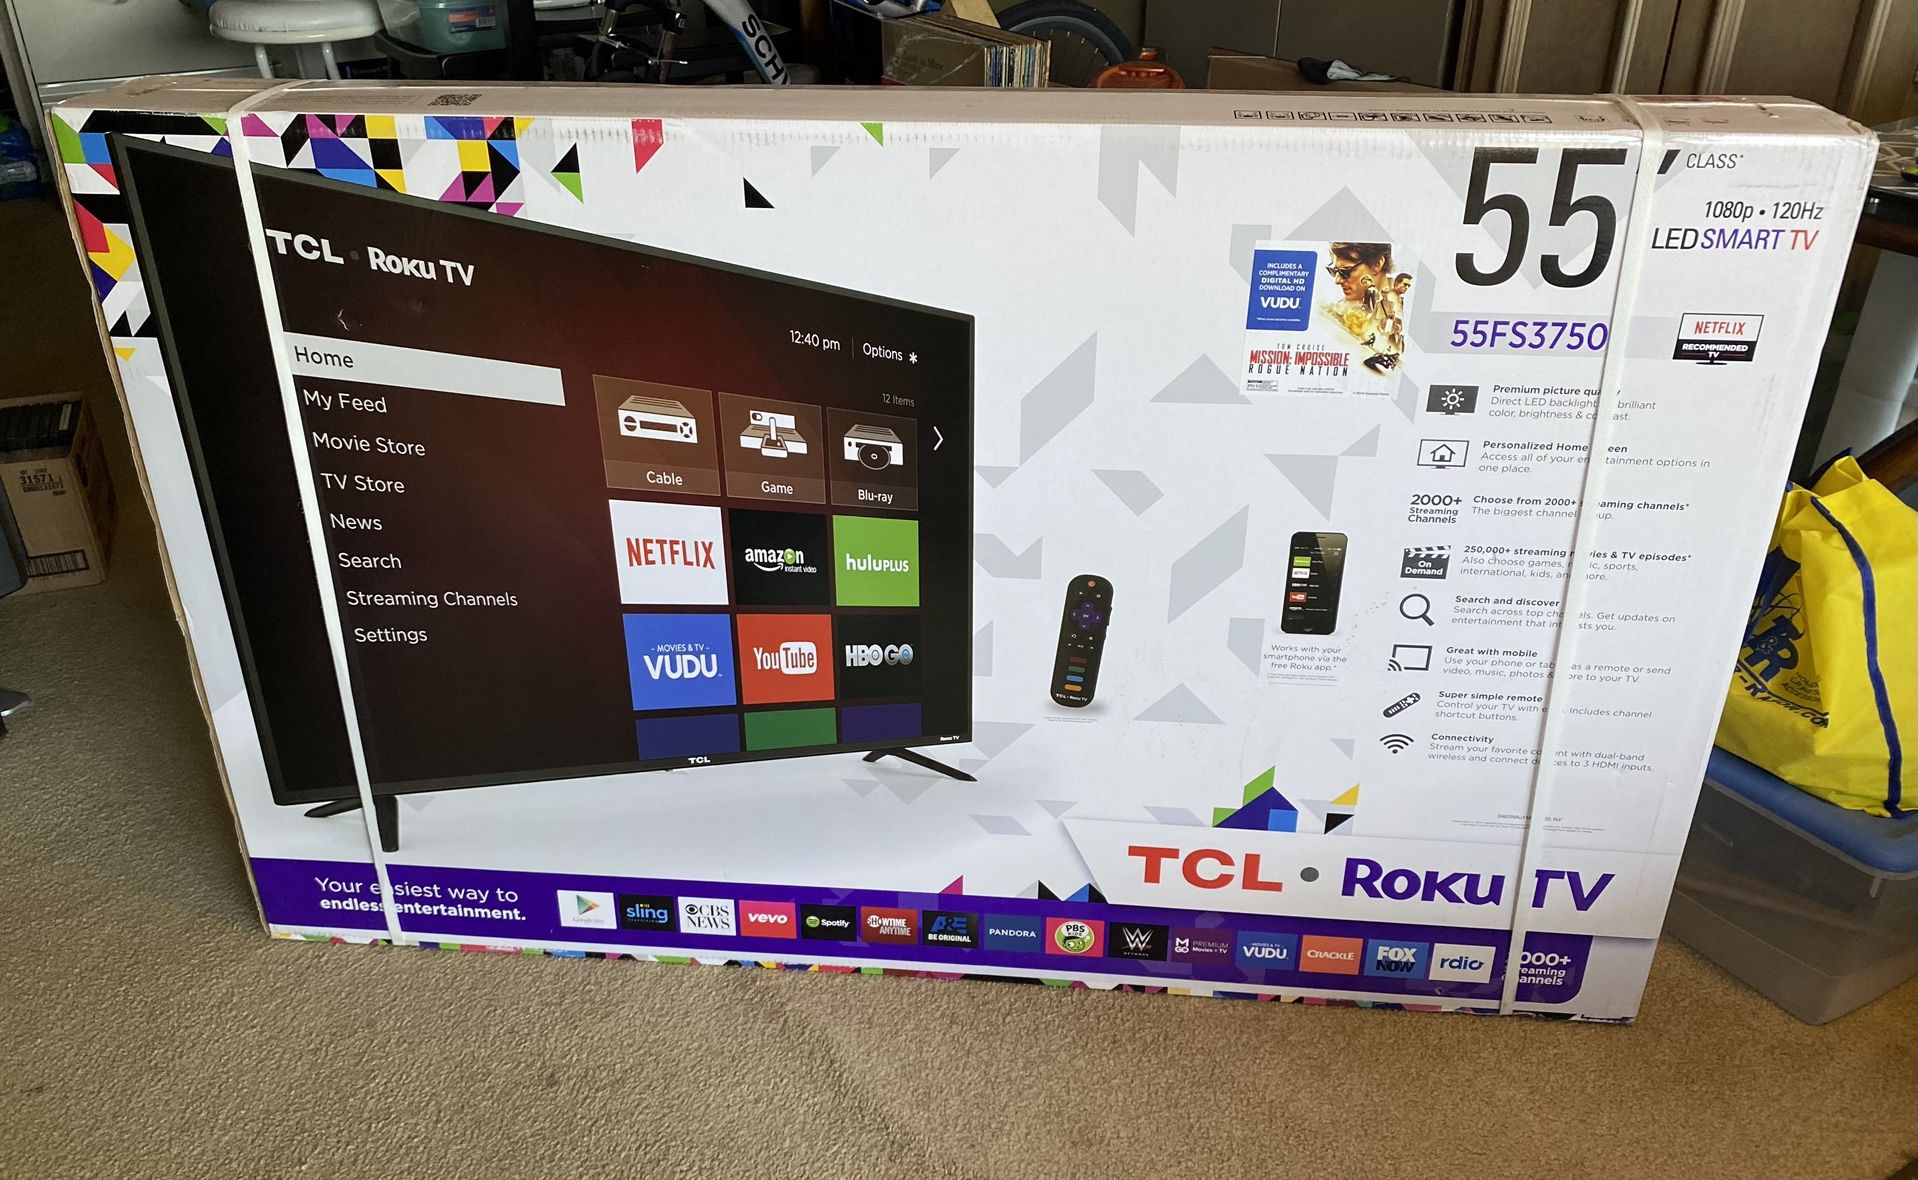 Brand NEW In Box 55” TCL Roku Smart TV!